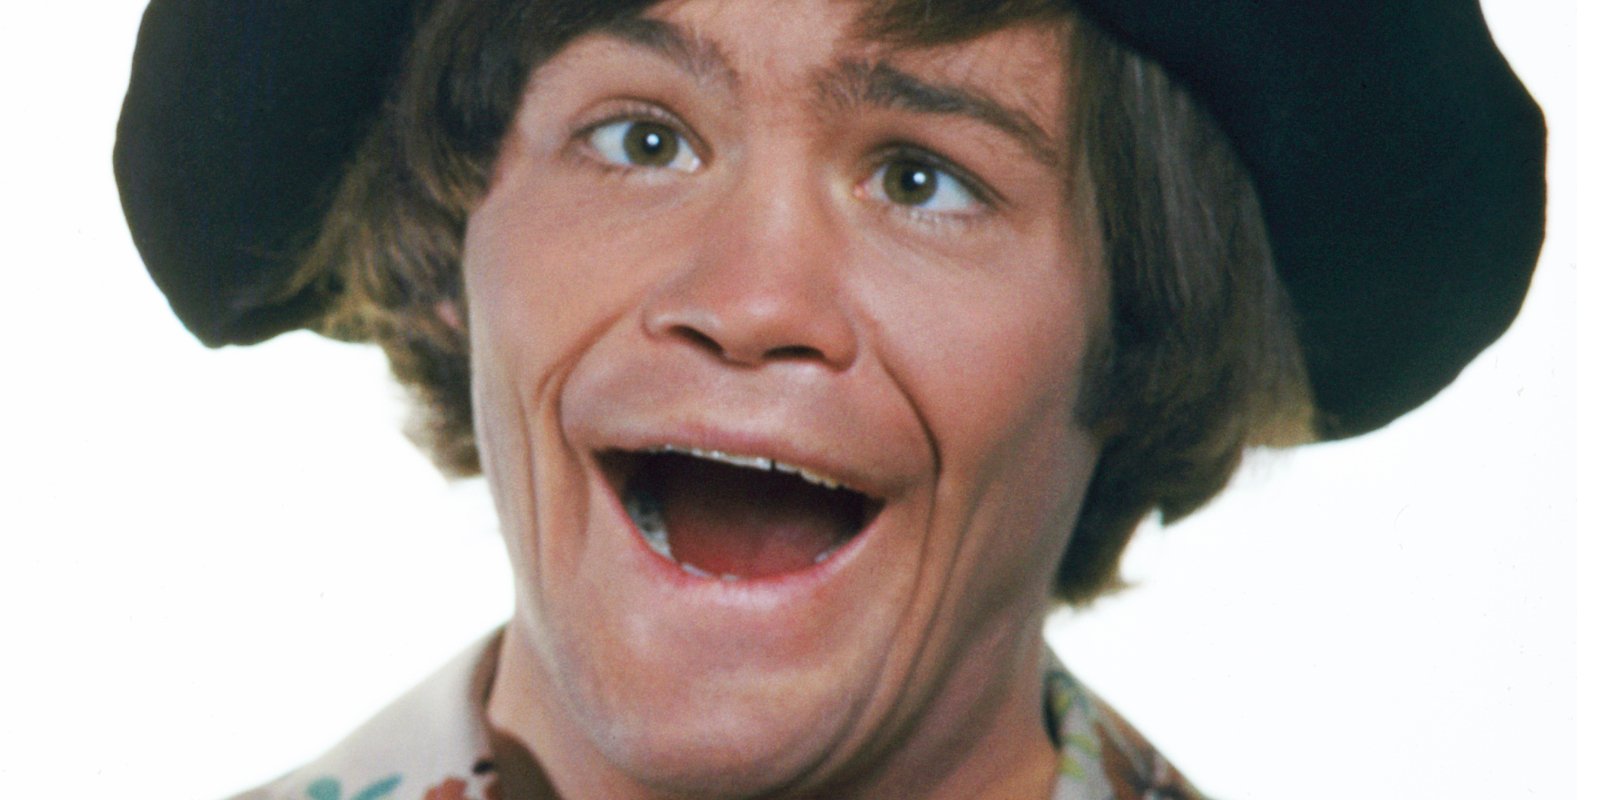 Micky Dolenz in a scene still from 'The Monkees' television show.